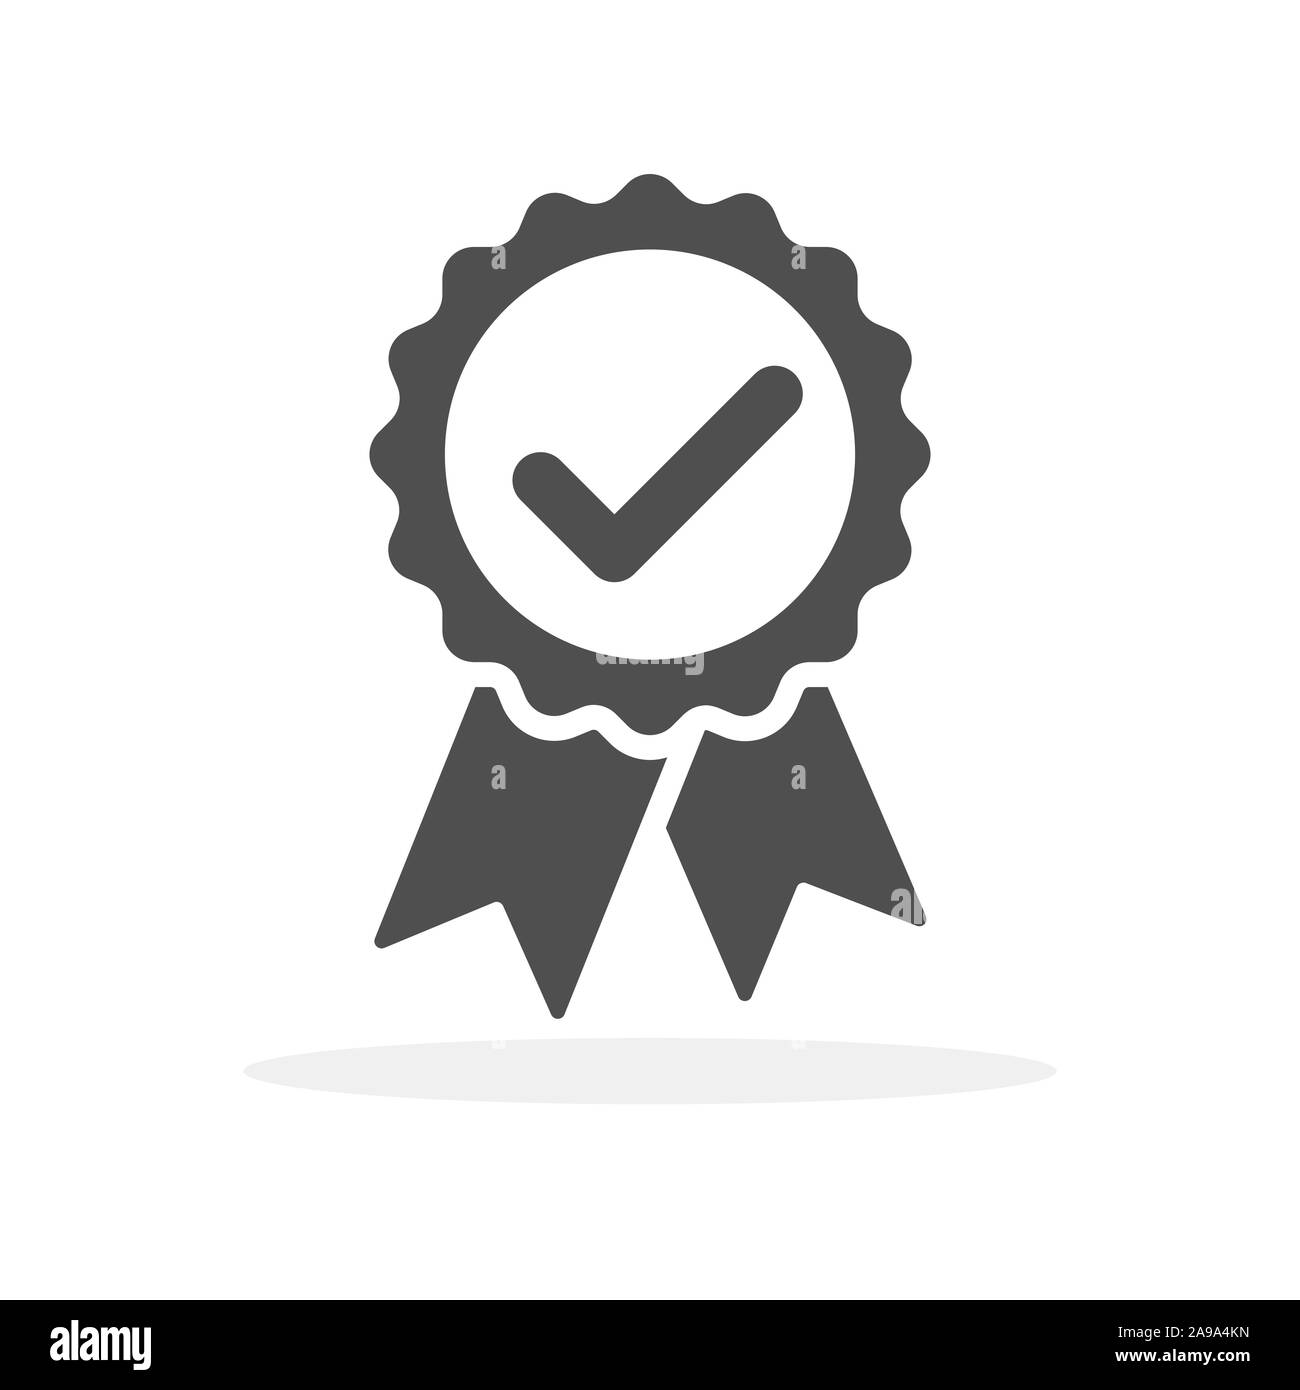 Approved icon isolated. Certified medal icon in flat design. Vector illustration. Stock Vector